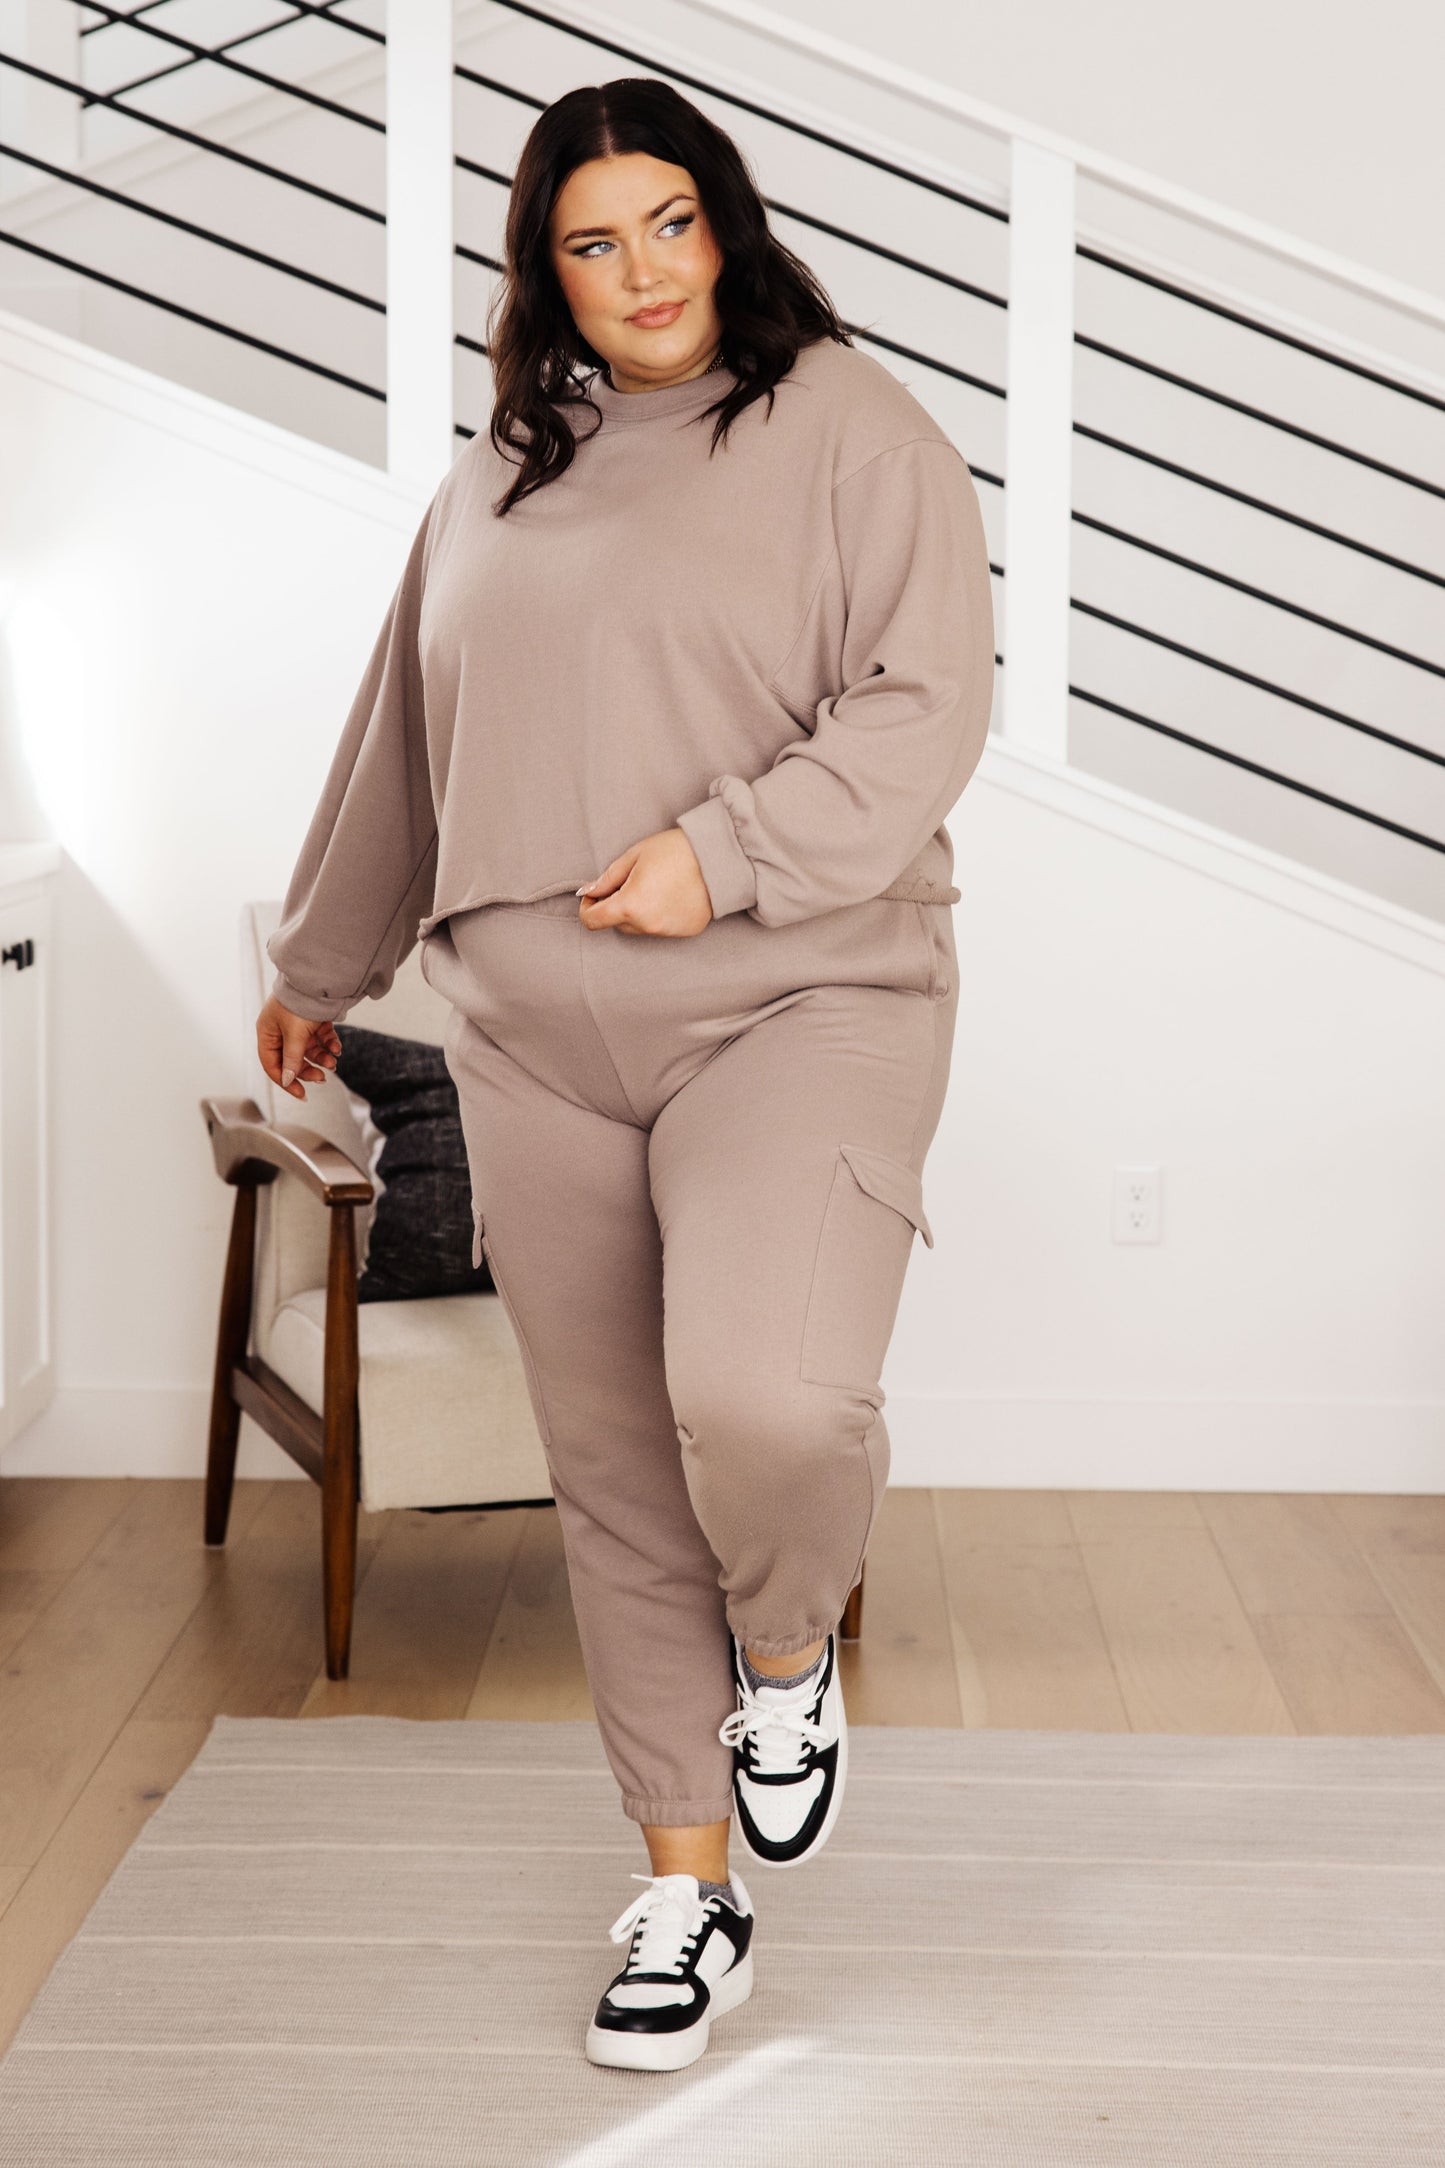 The Lounge A Lot Cut Off Sweatshirt is the perfect piece for weekend lounging. Crafted from lightweight french terry, it's designed with a crew neck, dropped shoulder, and a relaxed fit. The cut off hem allows for maximum comfort, while the matching pants provide the perfect lounge fit. S - XL